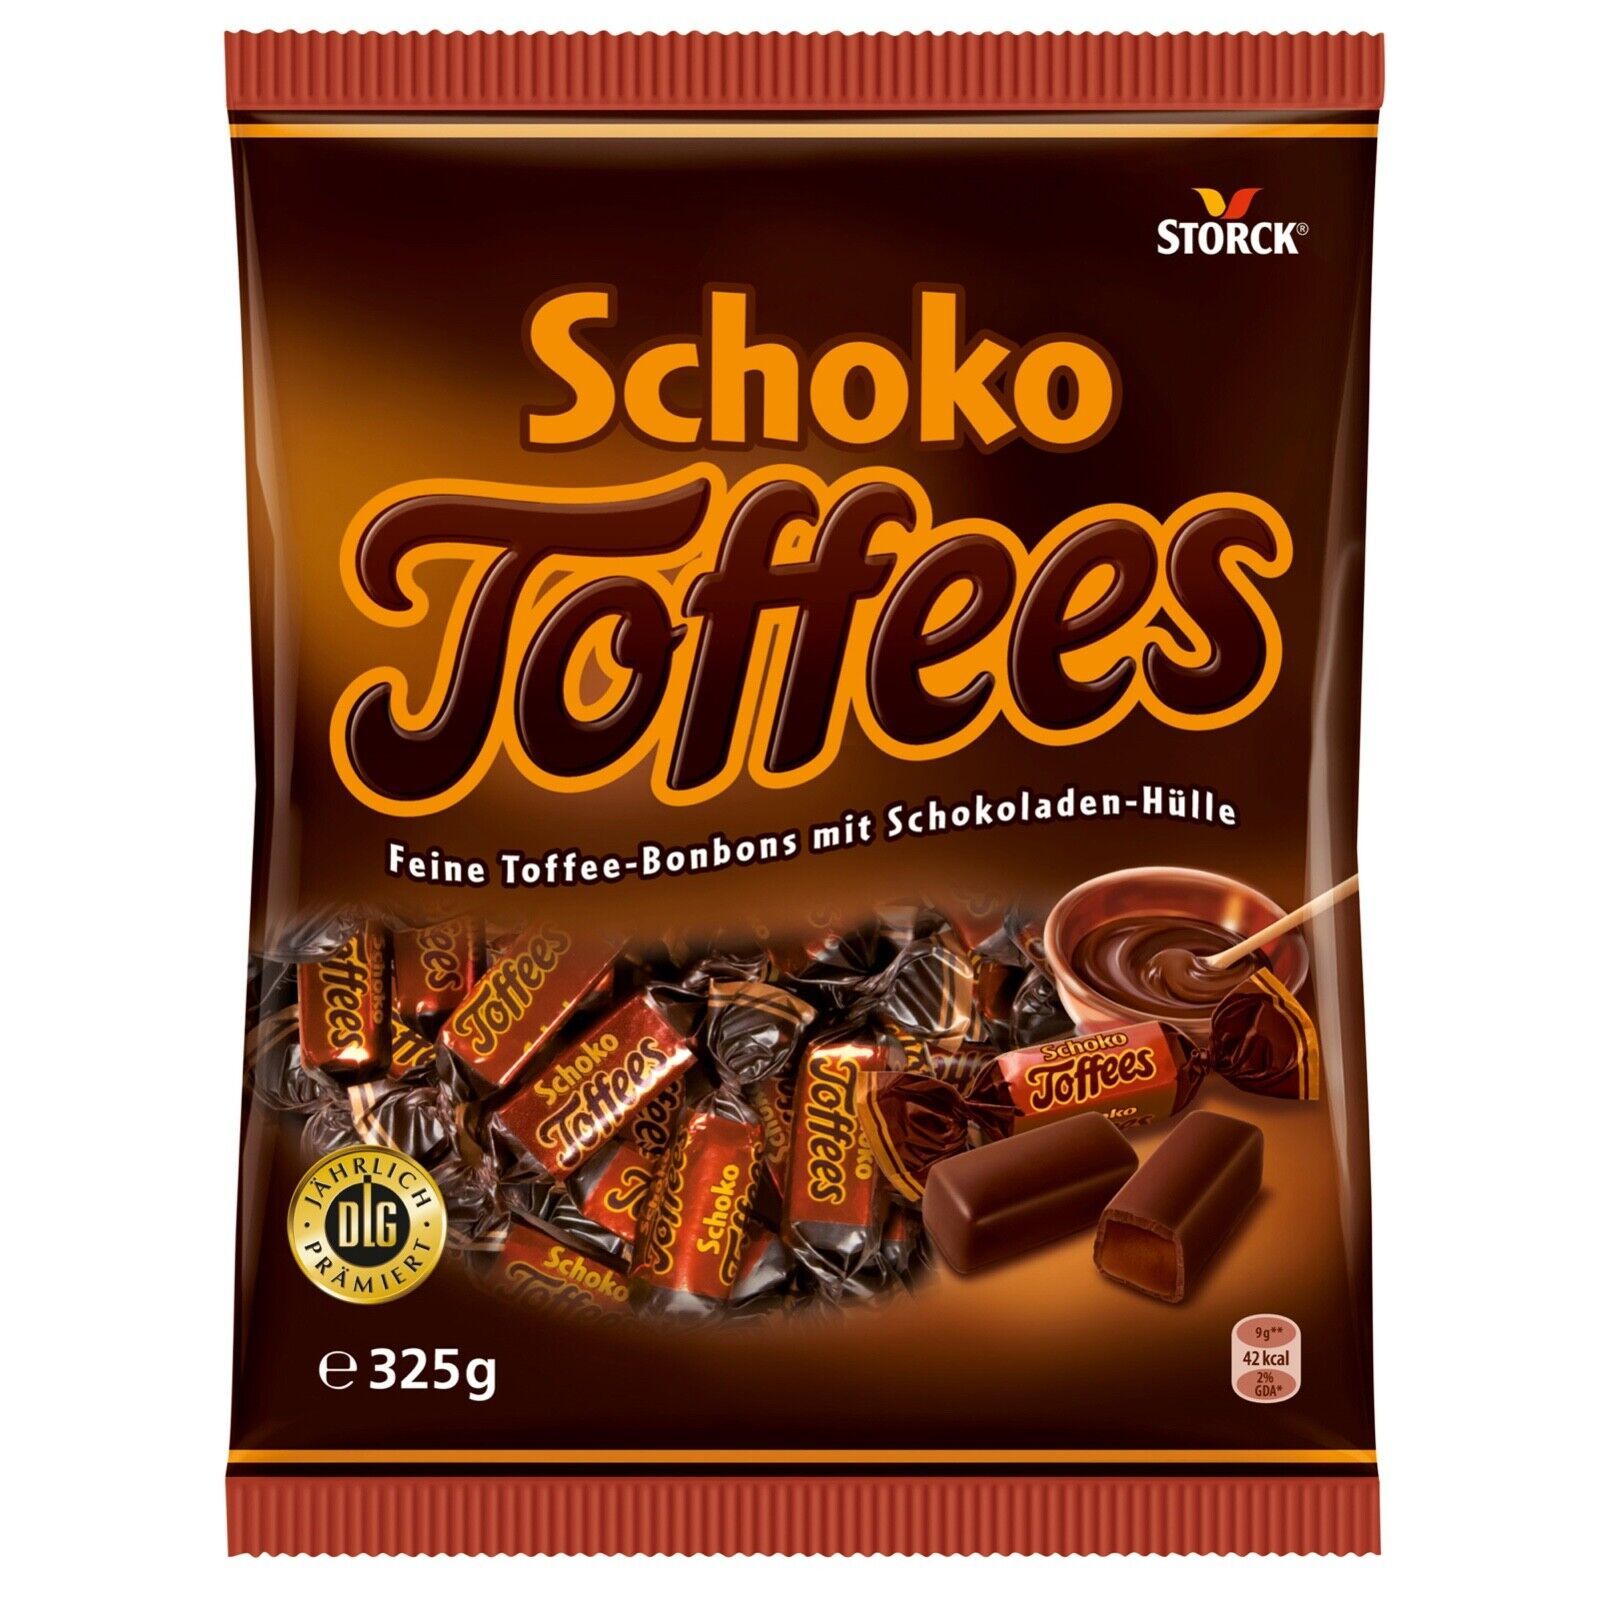 Storck Schoko Toffees European toffee candy 325g -Made in Germany-FREE SHIPPING - $14.36